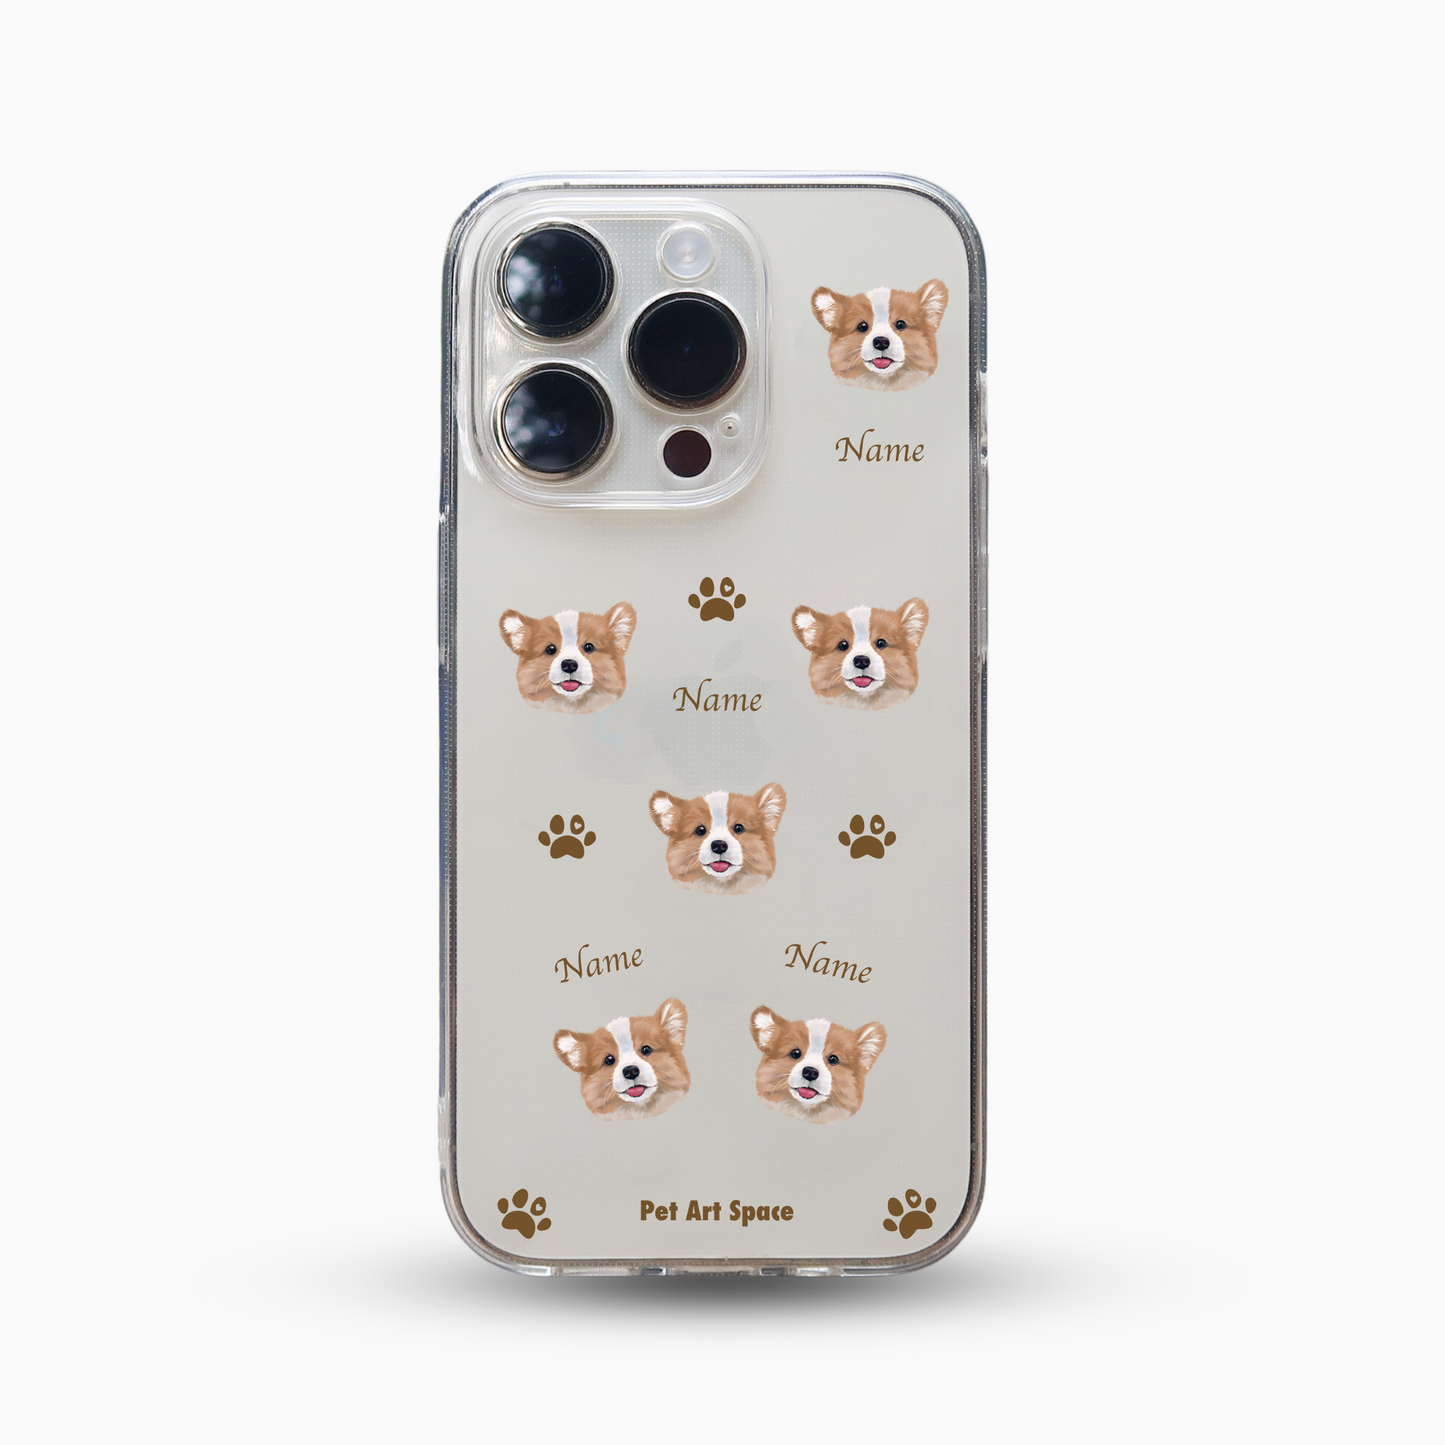 Paws for 1 pet - Soft Clear Case with Camera Covered